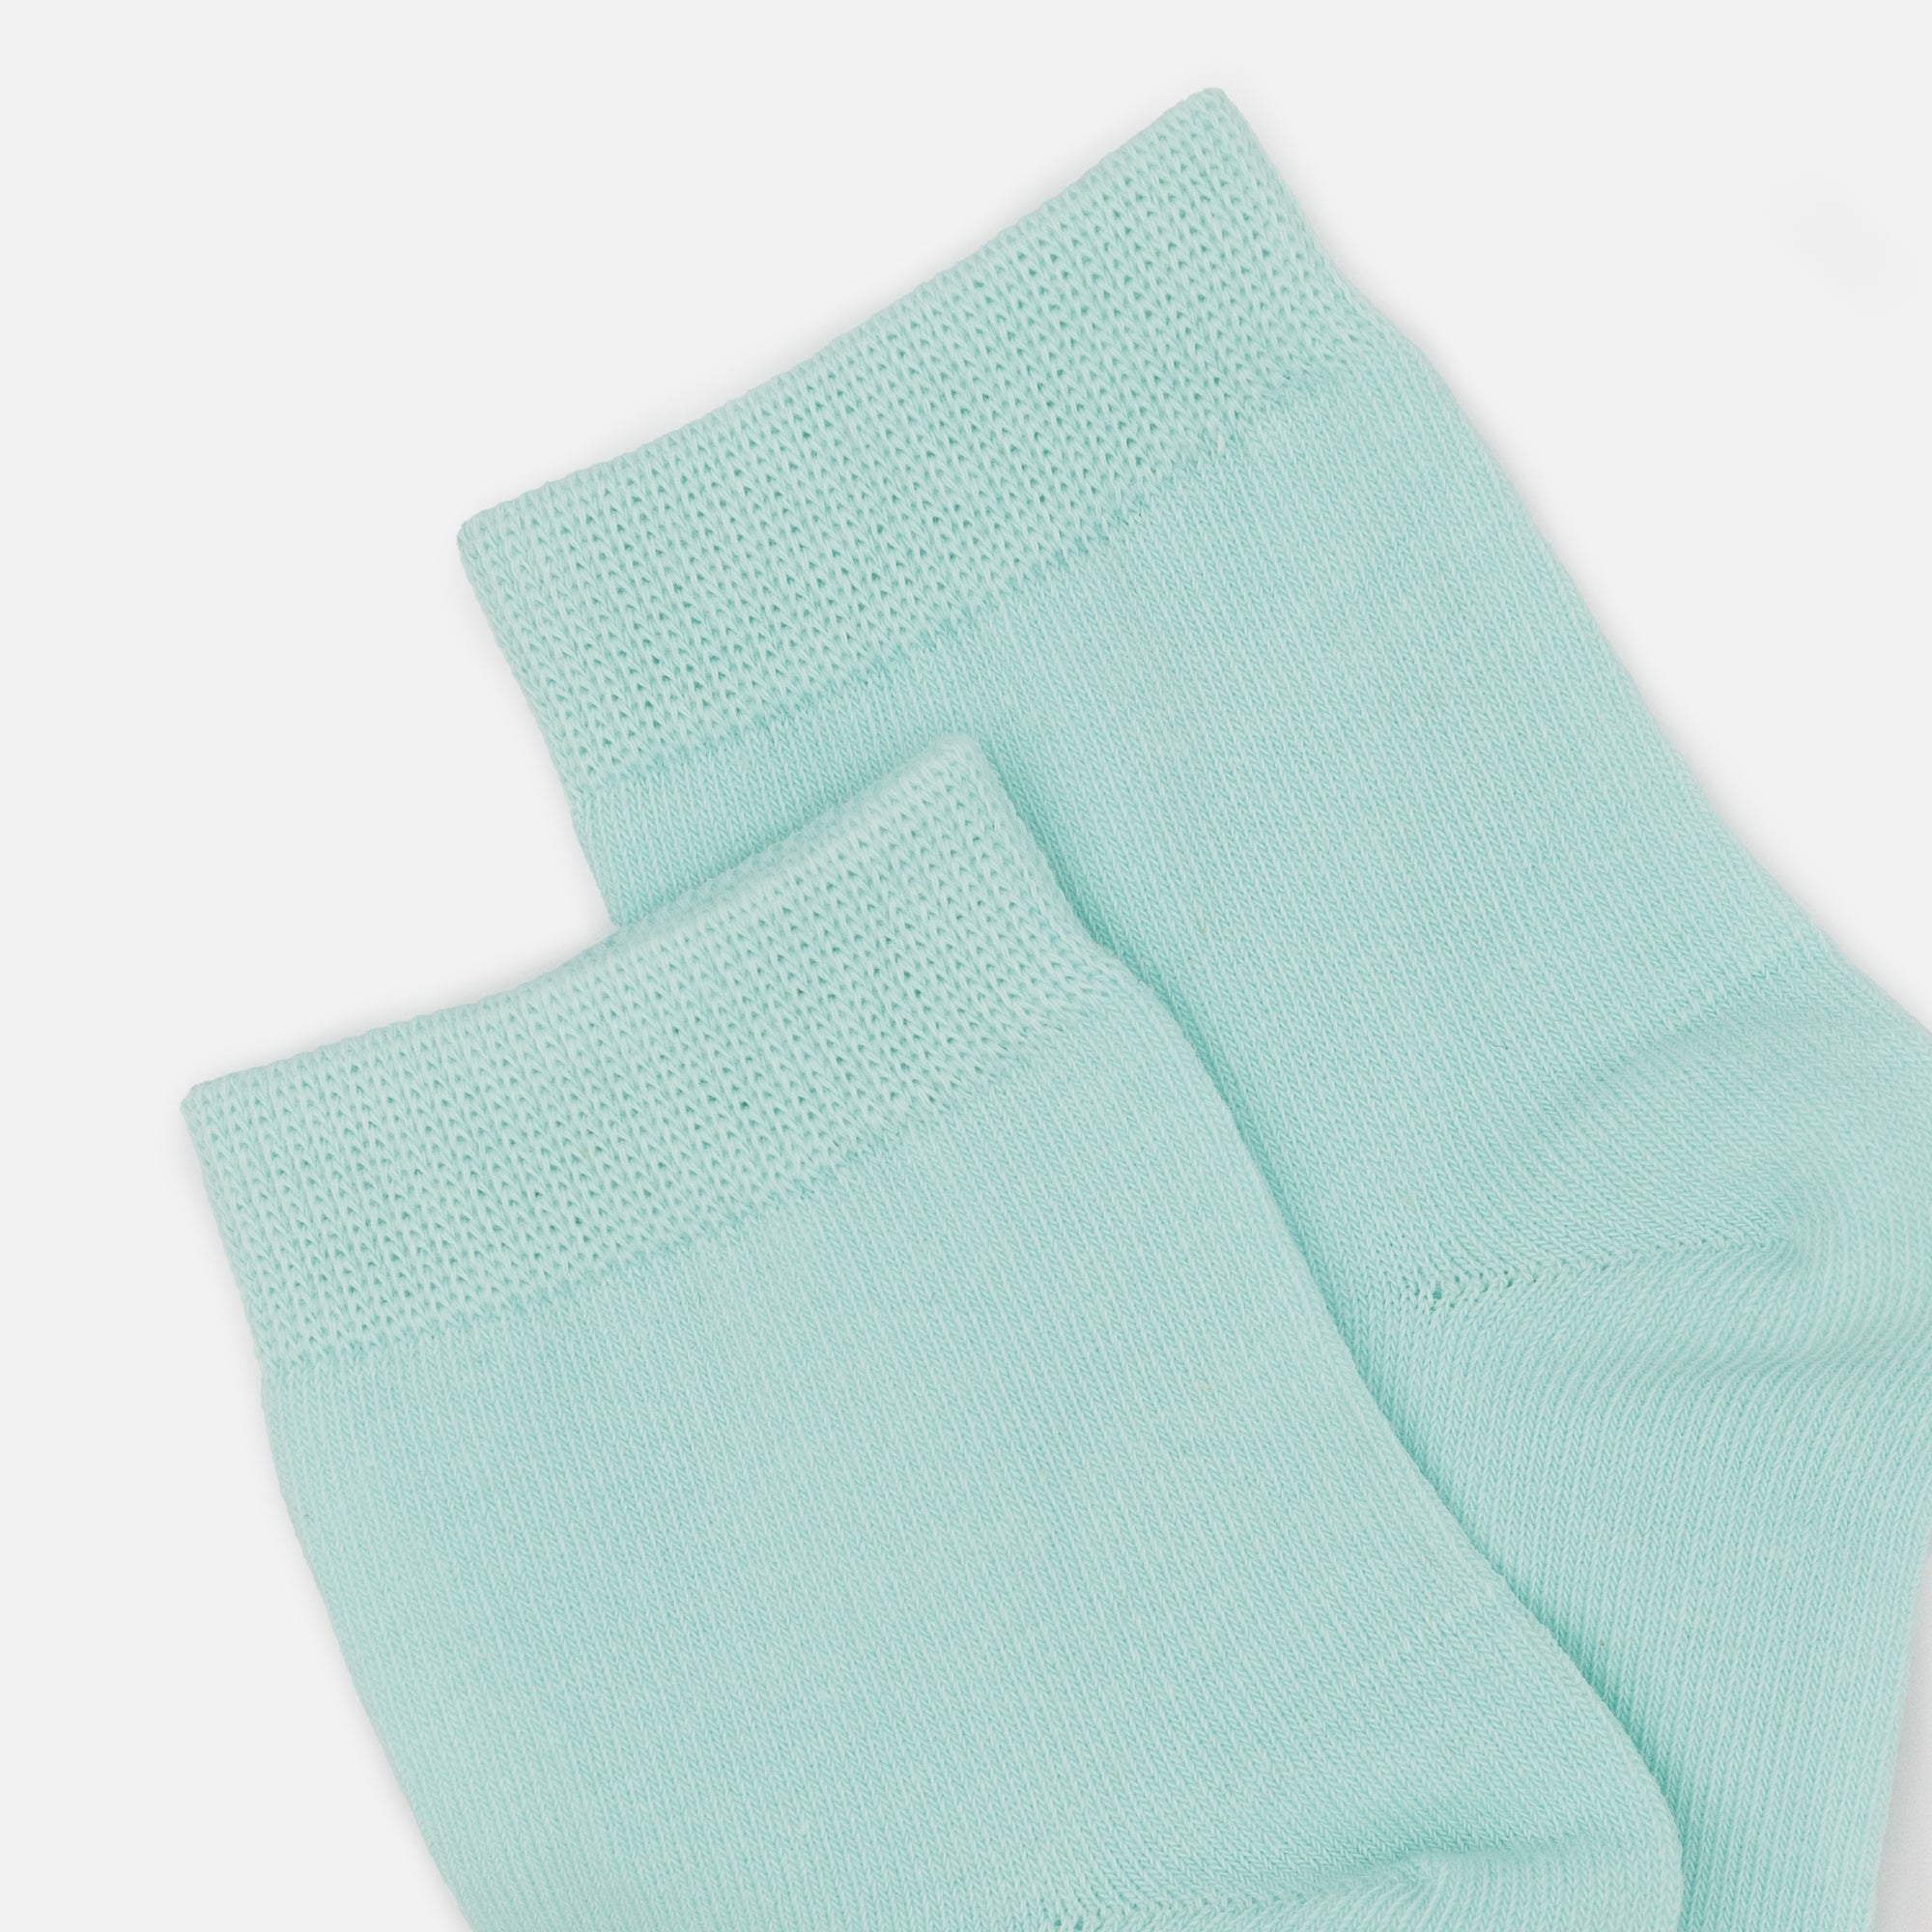 Mid-length turquoise stockings with band trim